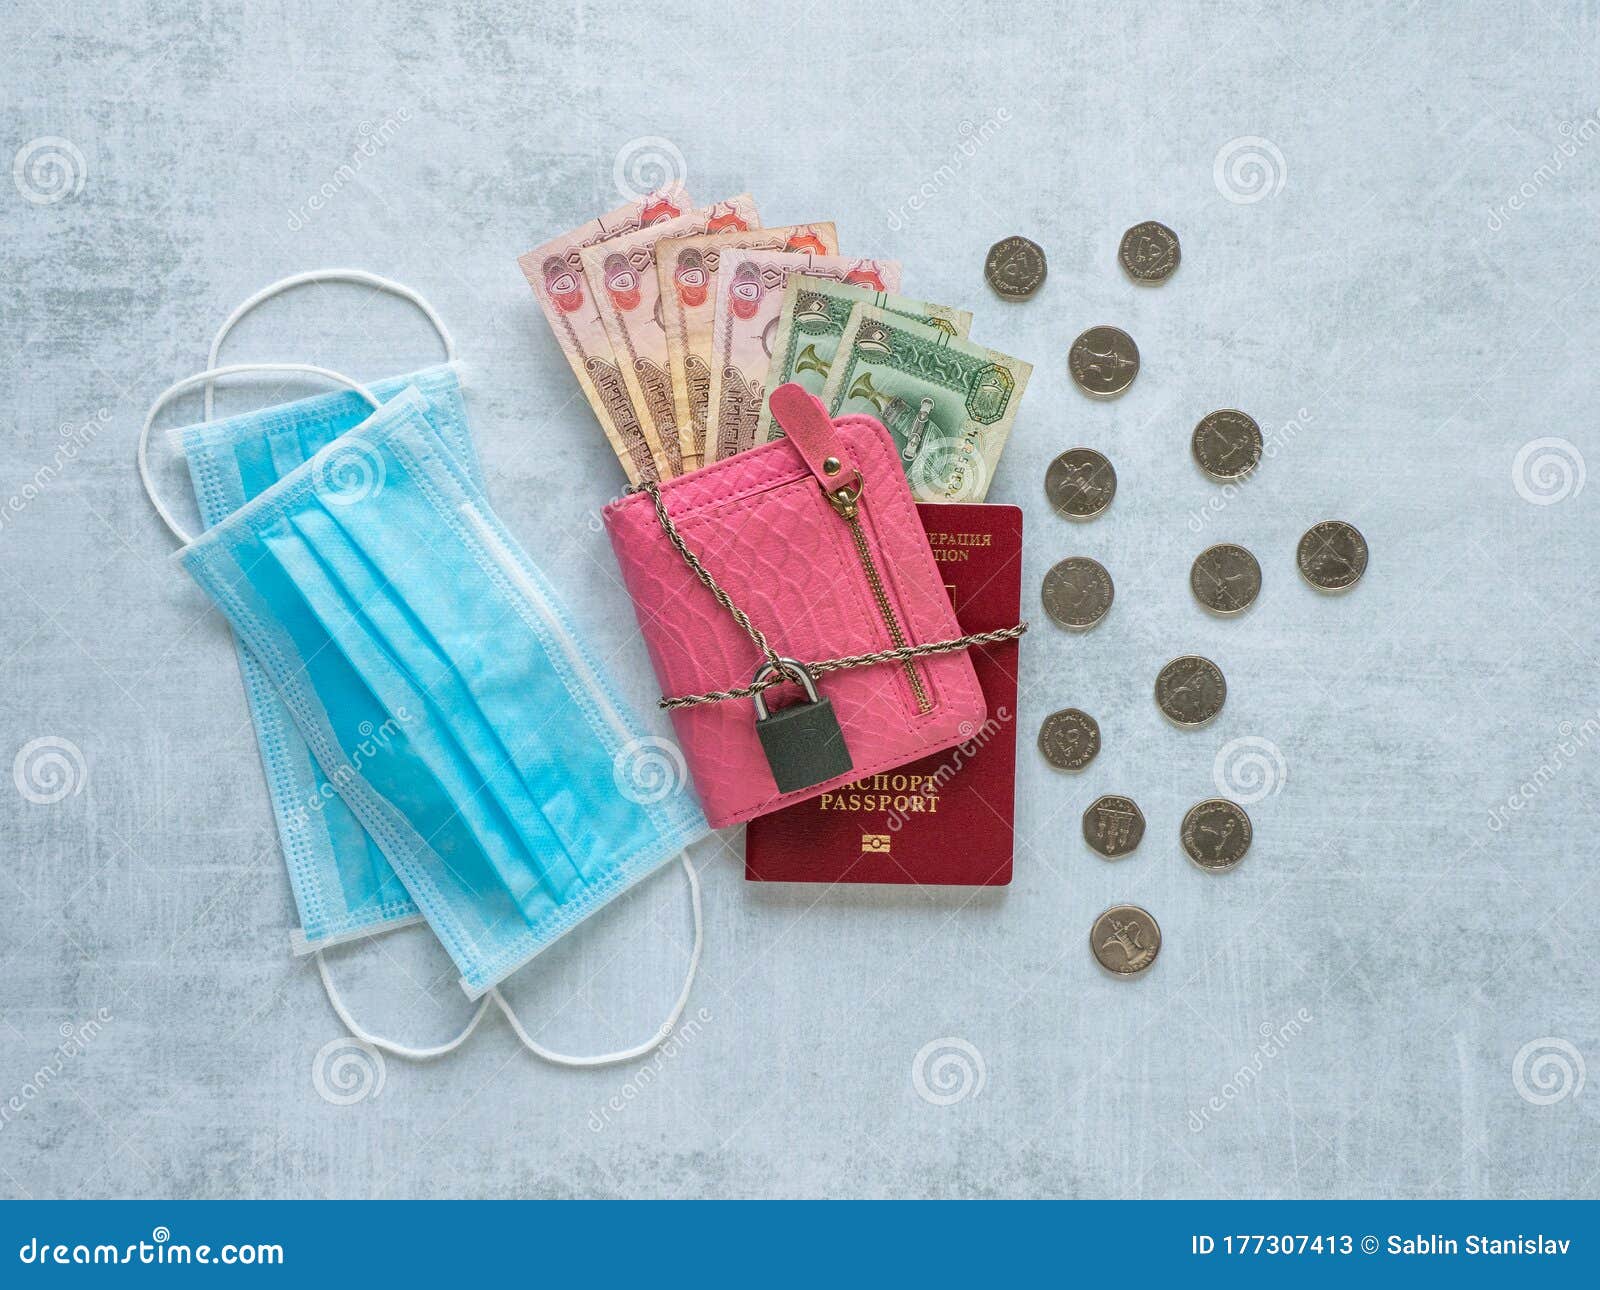 A Medical Mask, Pink Wallet, Arabic Dirhams, Chain And Lock. Pandemic And The Economic Crisis Of ...